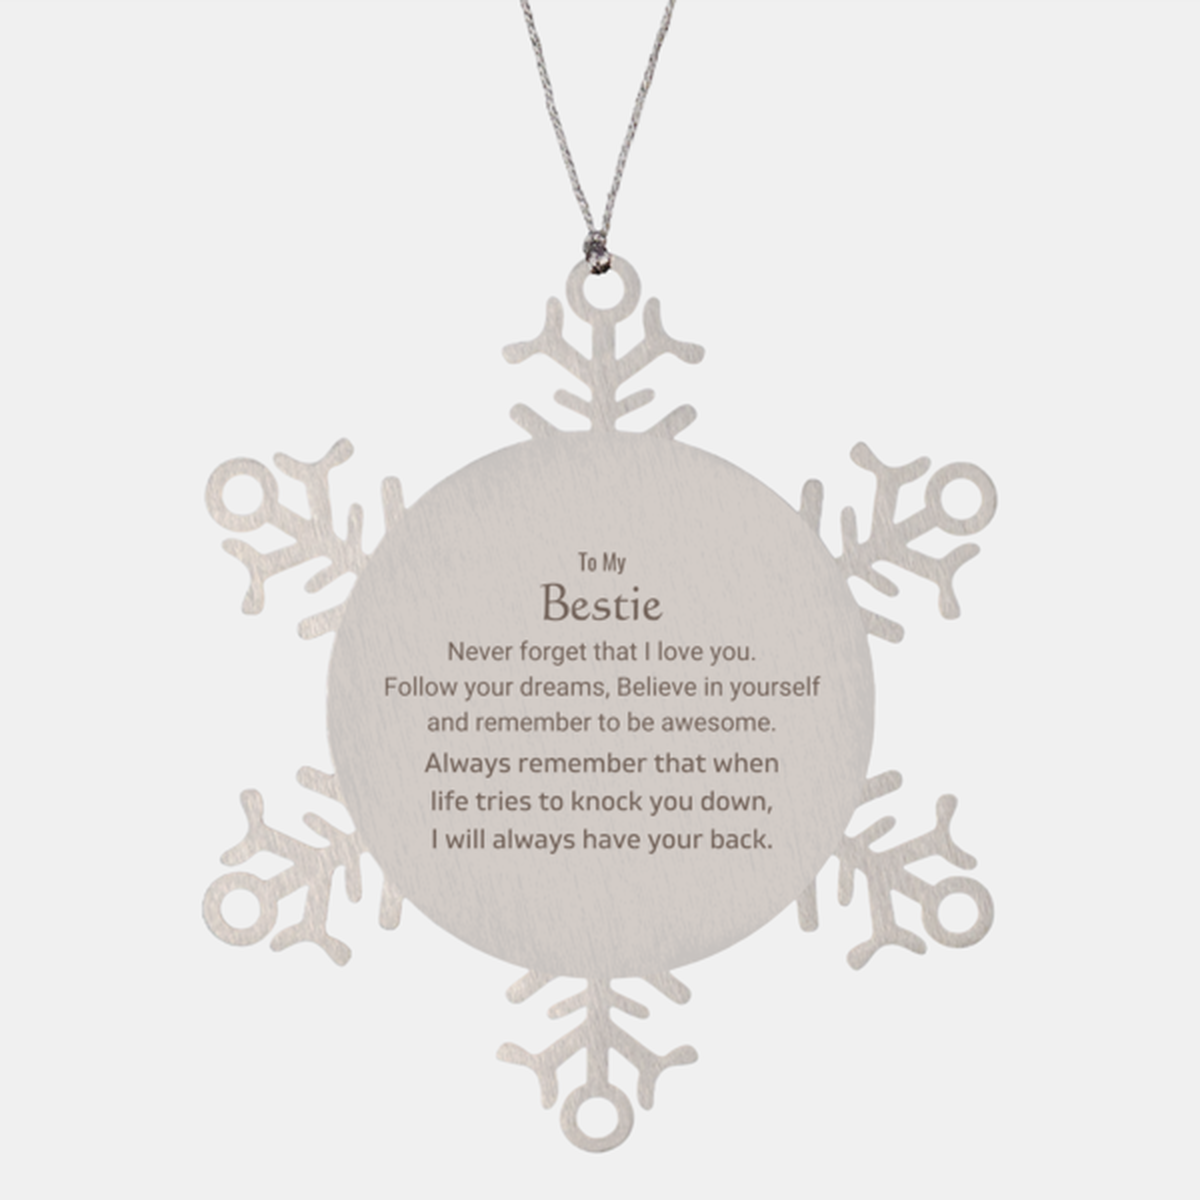 Inspirational Gifts for Bestie, Follow your dreams, Believe in yourself, Bestie Snowflake Ornament, Birthday Christmas Unique Gifts For Bestie